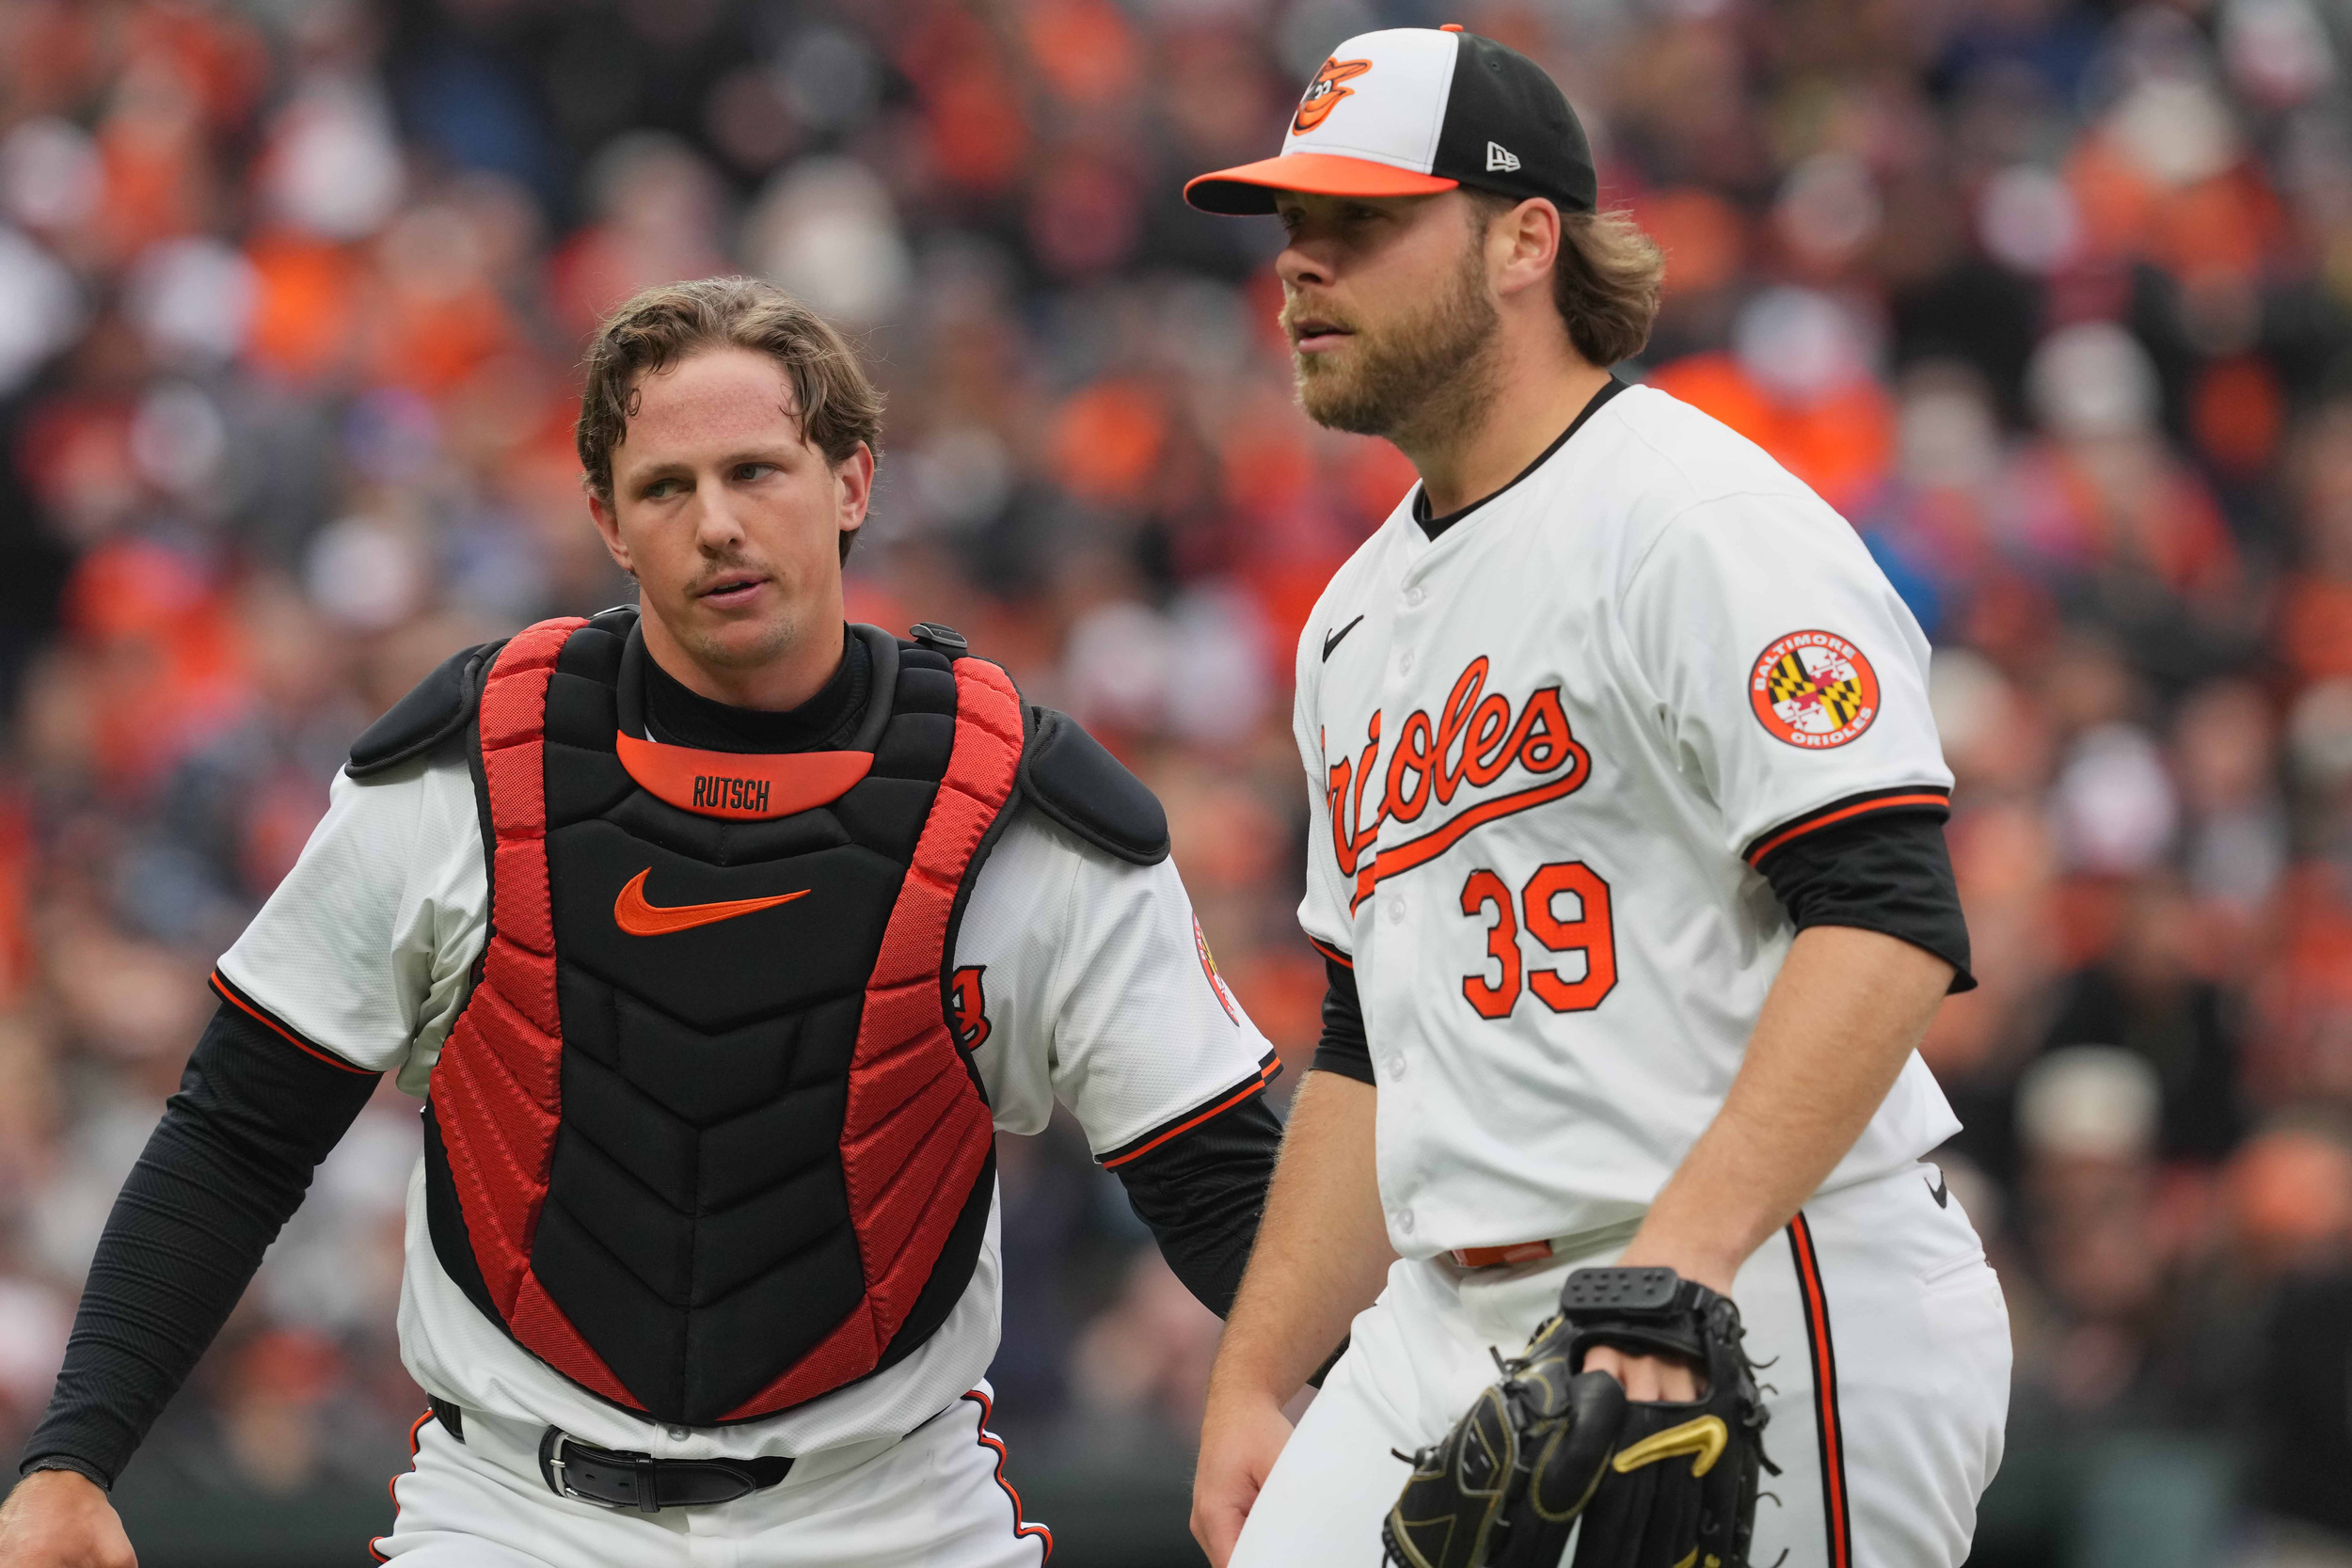 orioles have the look of a team ready to contend for world series